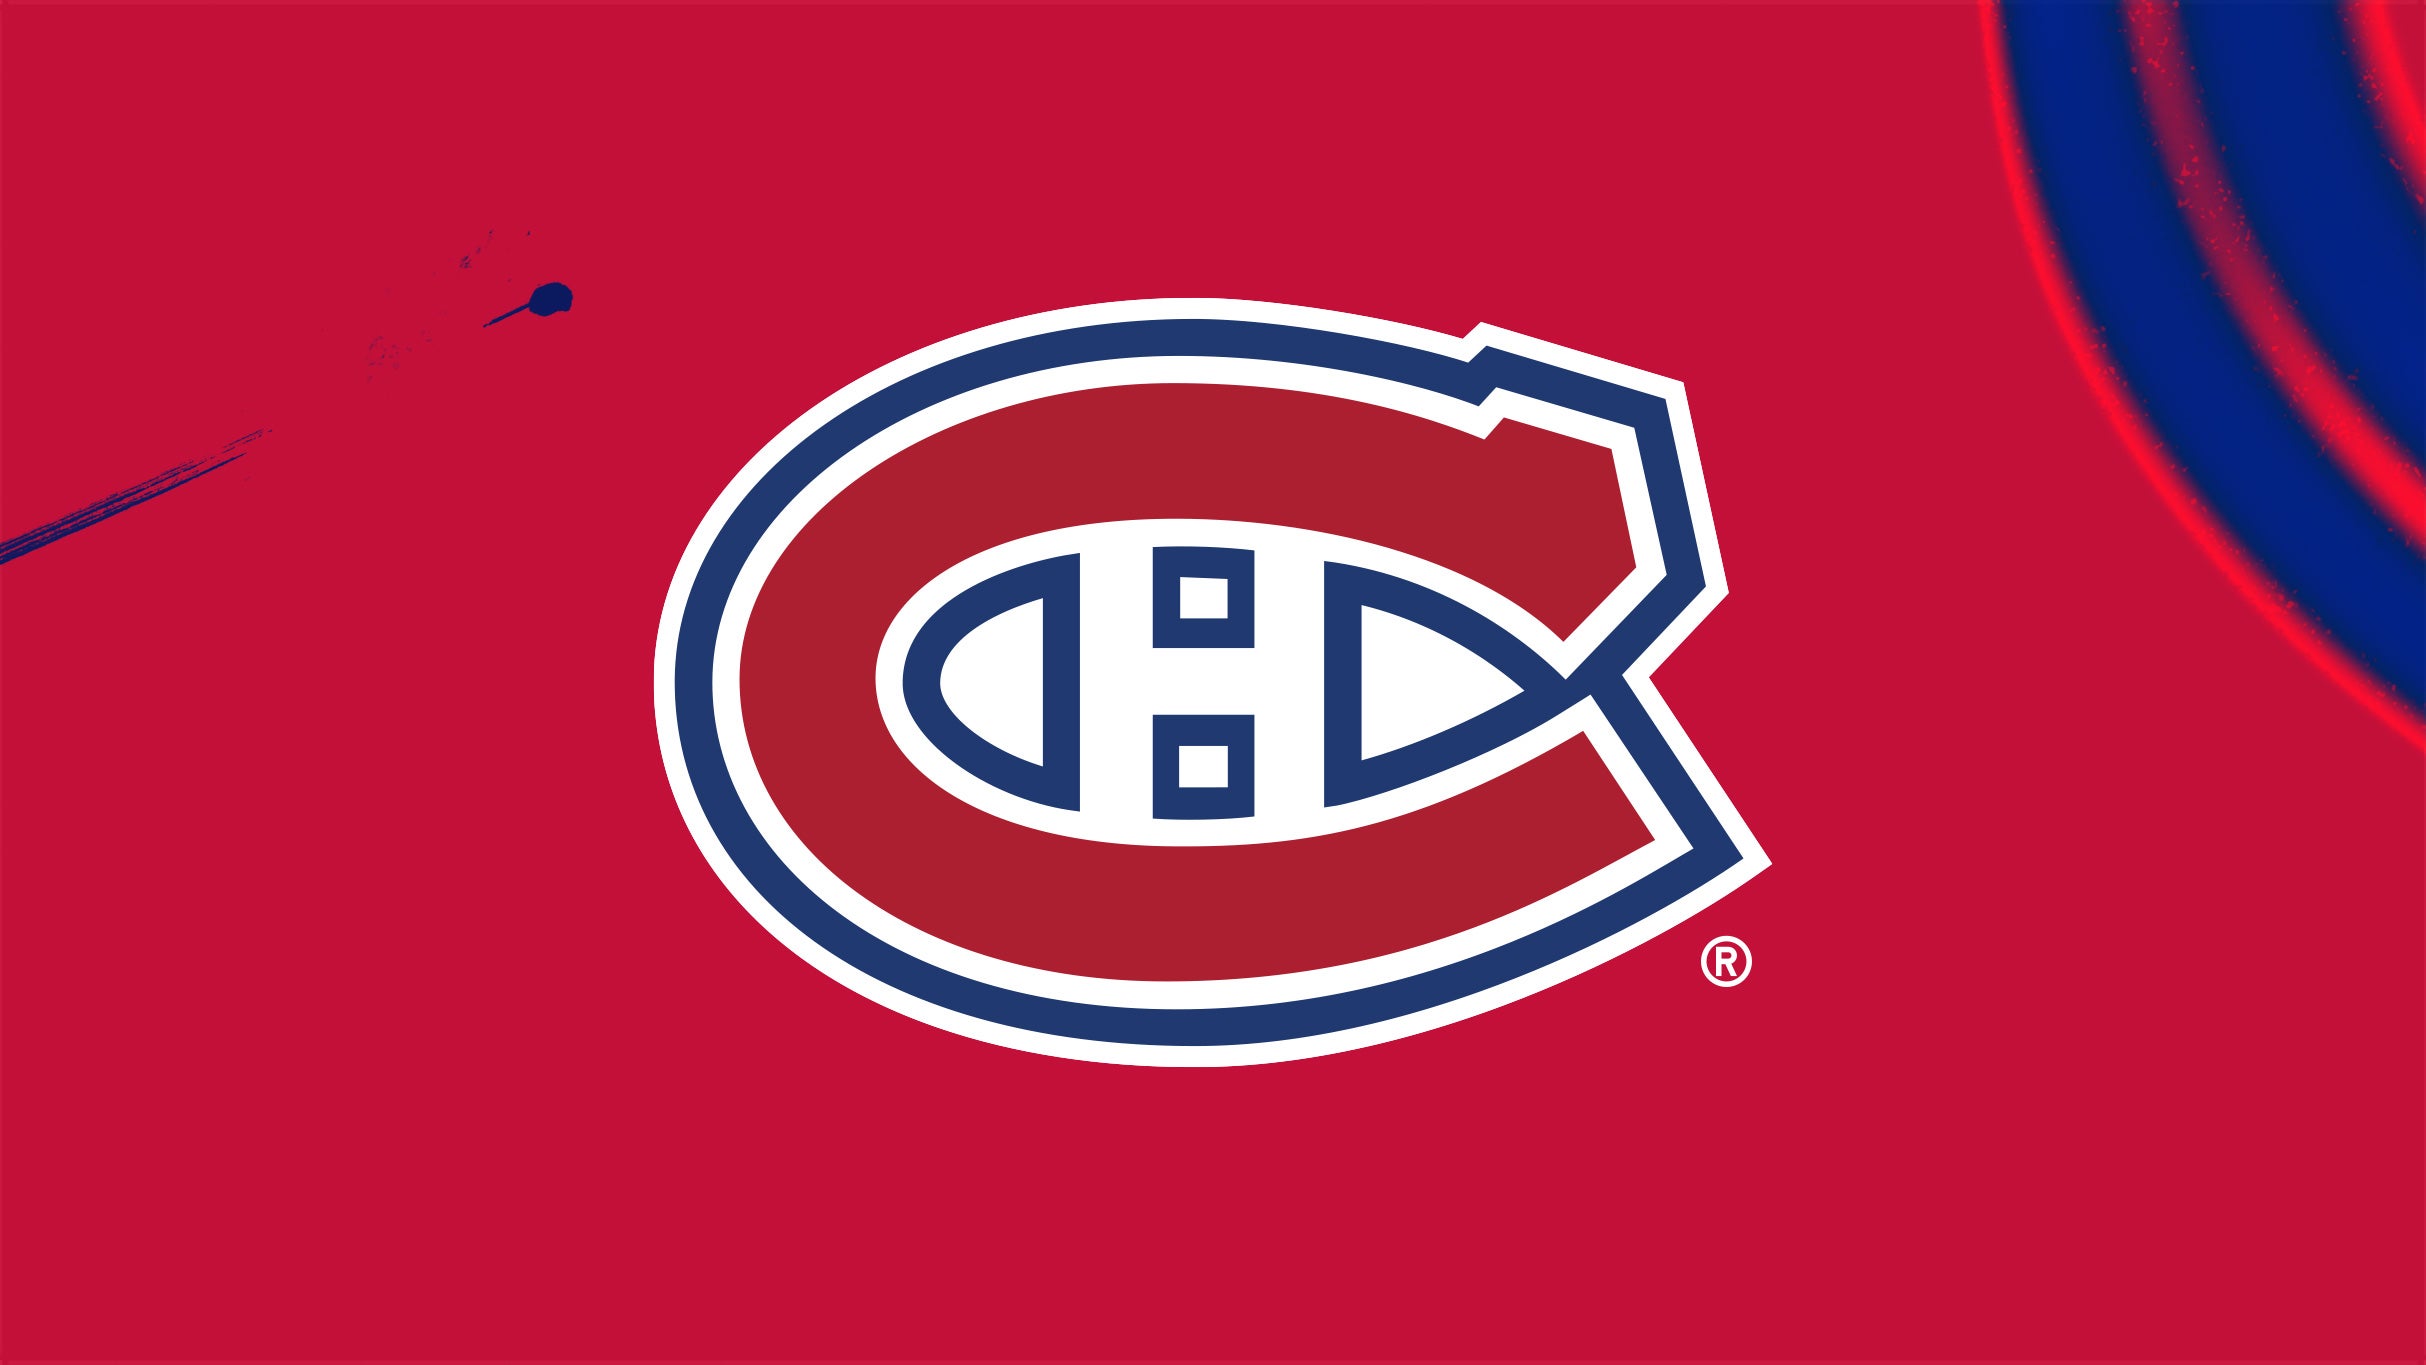 Montreal Canadiens vs. St. Louis Blues in Montreal promo photo for Offre Diamant / Diamond  presale offer code